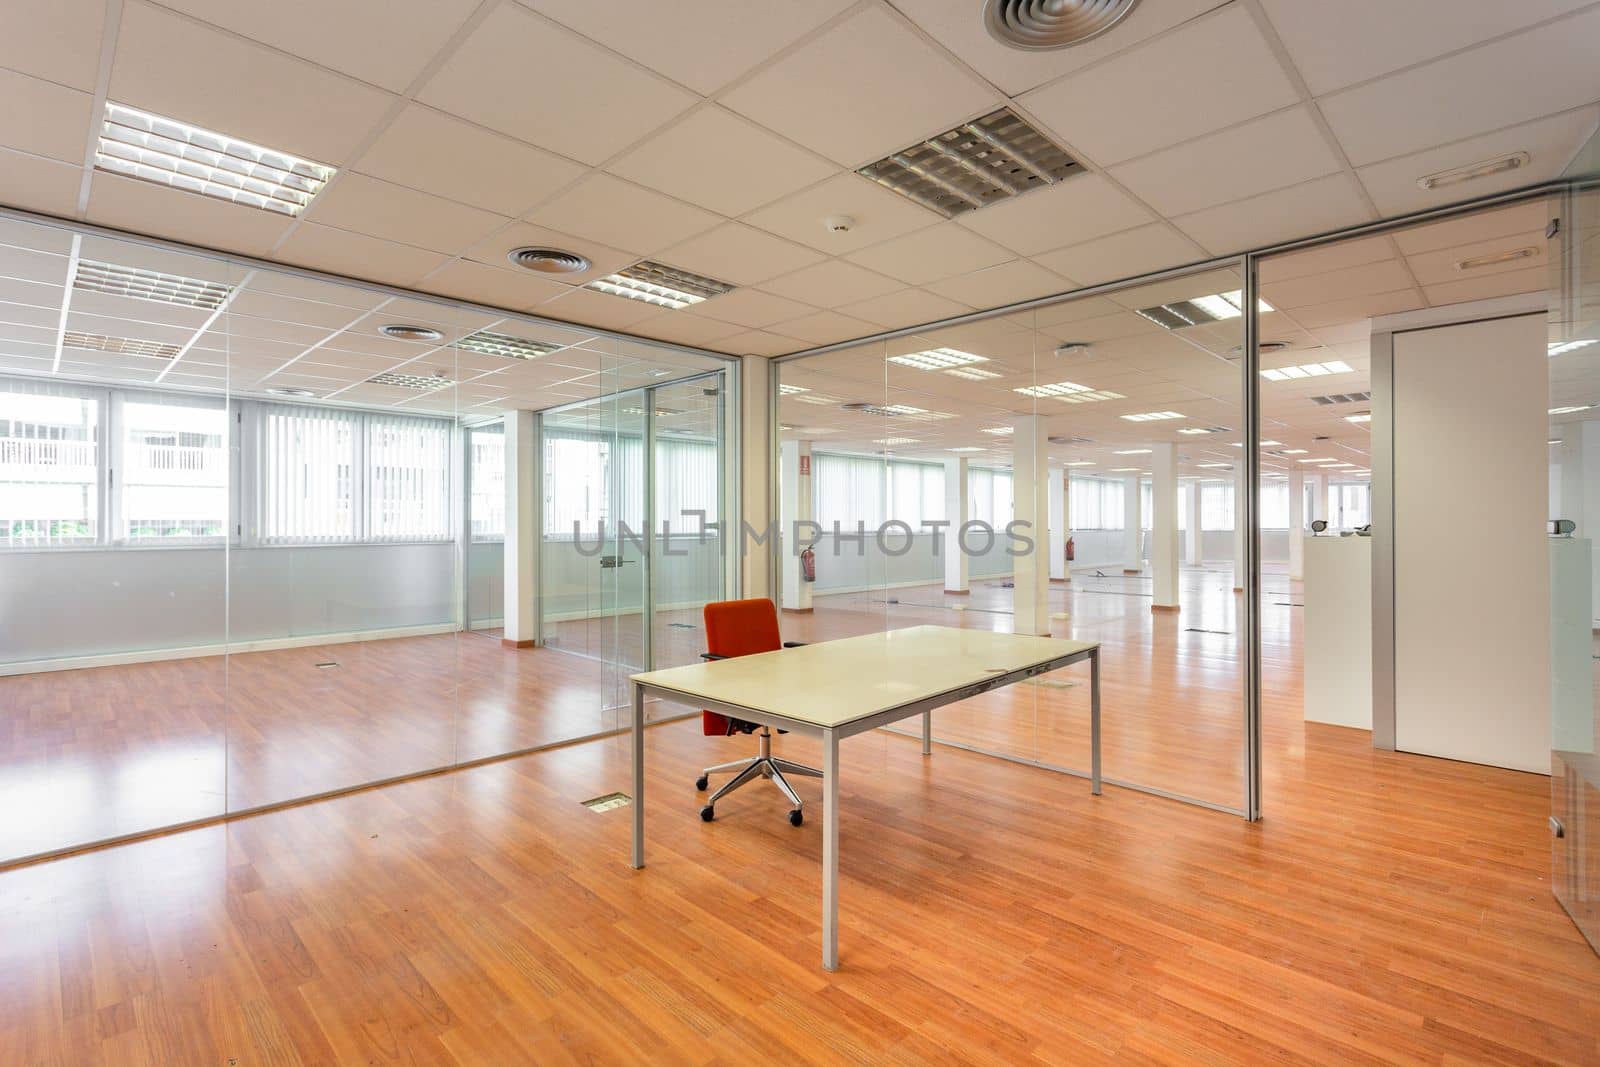 In a bankrupt office building, one of the many empty rooms with transparent, solid glass wall panels and an outdated ceiling covering is in need of repair and refurbishment. by apavlin